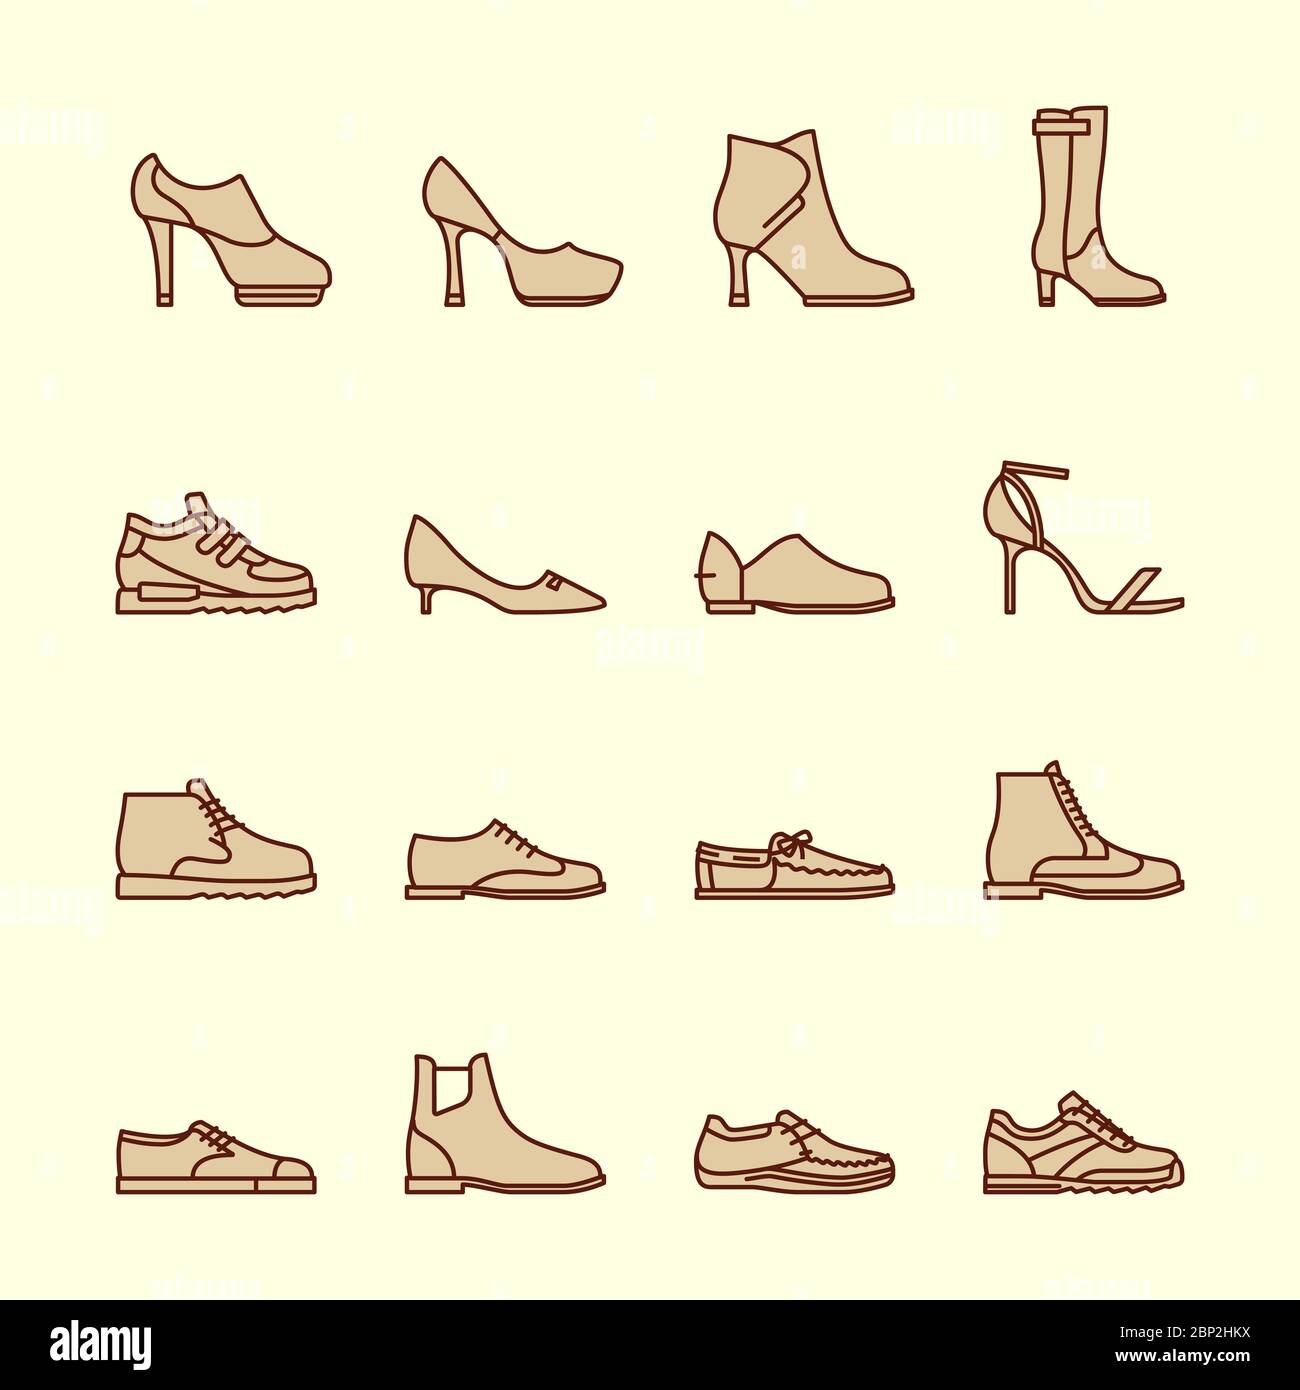 Shoes line vector icons. Sneakers and women shoes, footwear icons vintage style Stock Vector